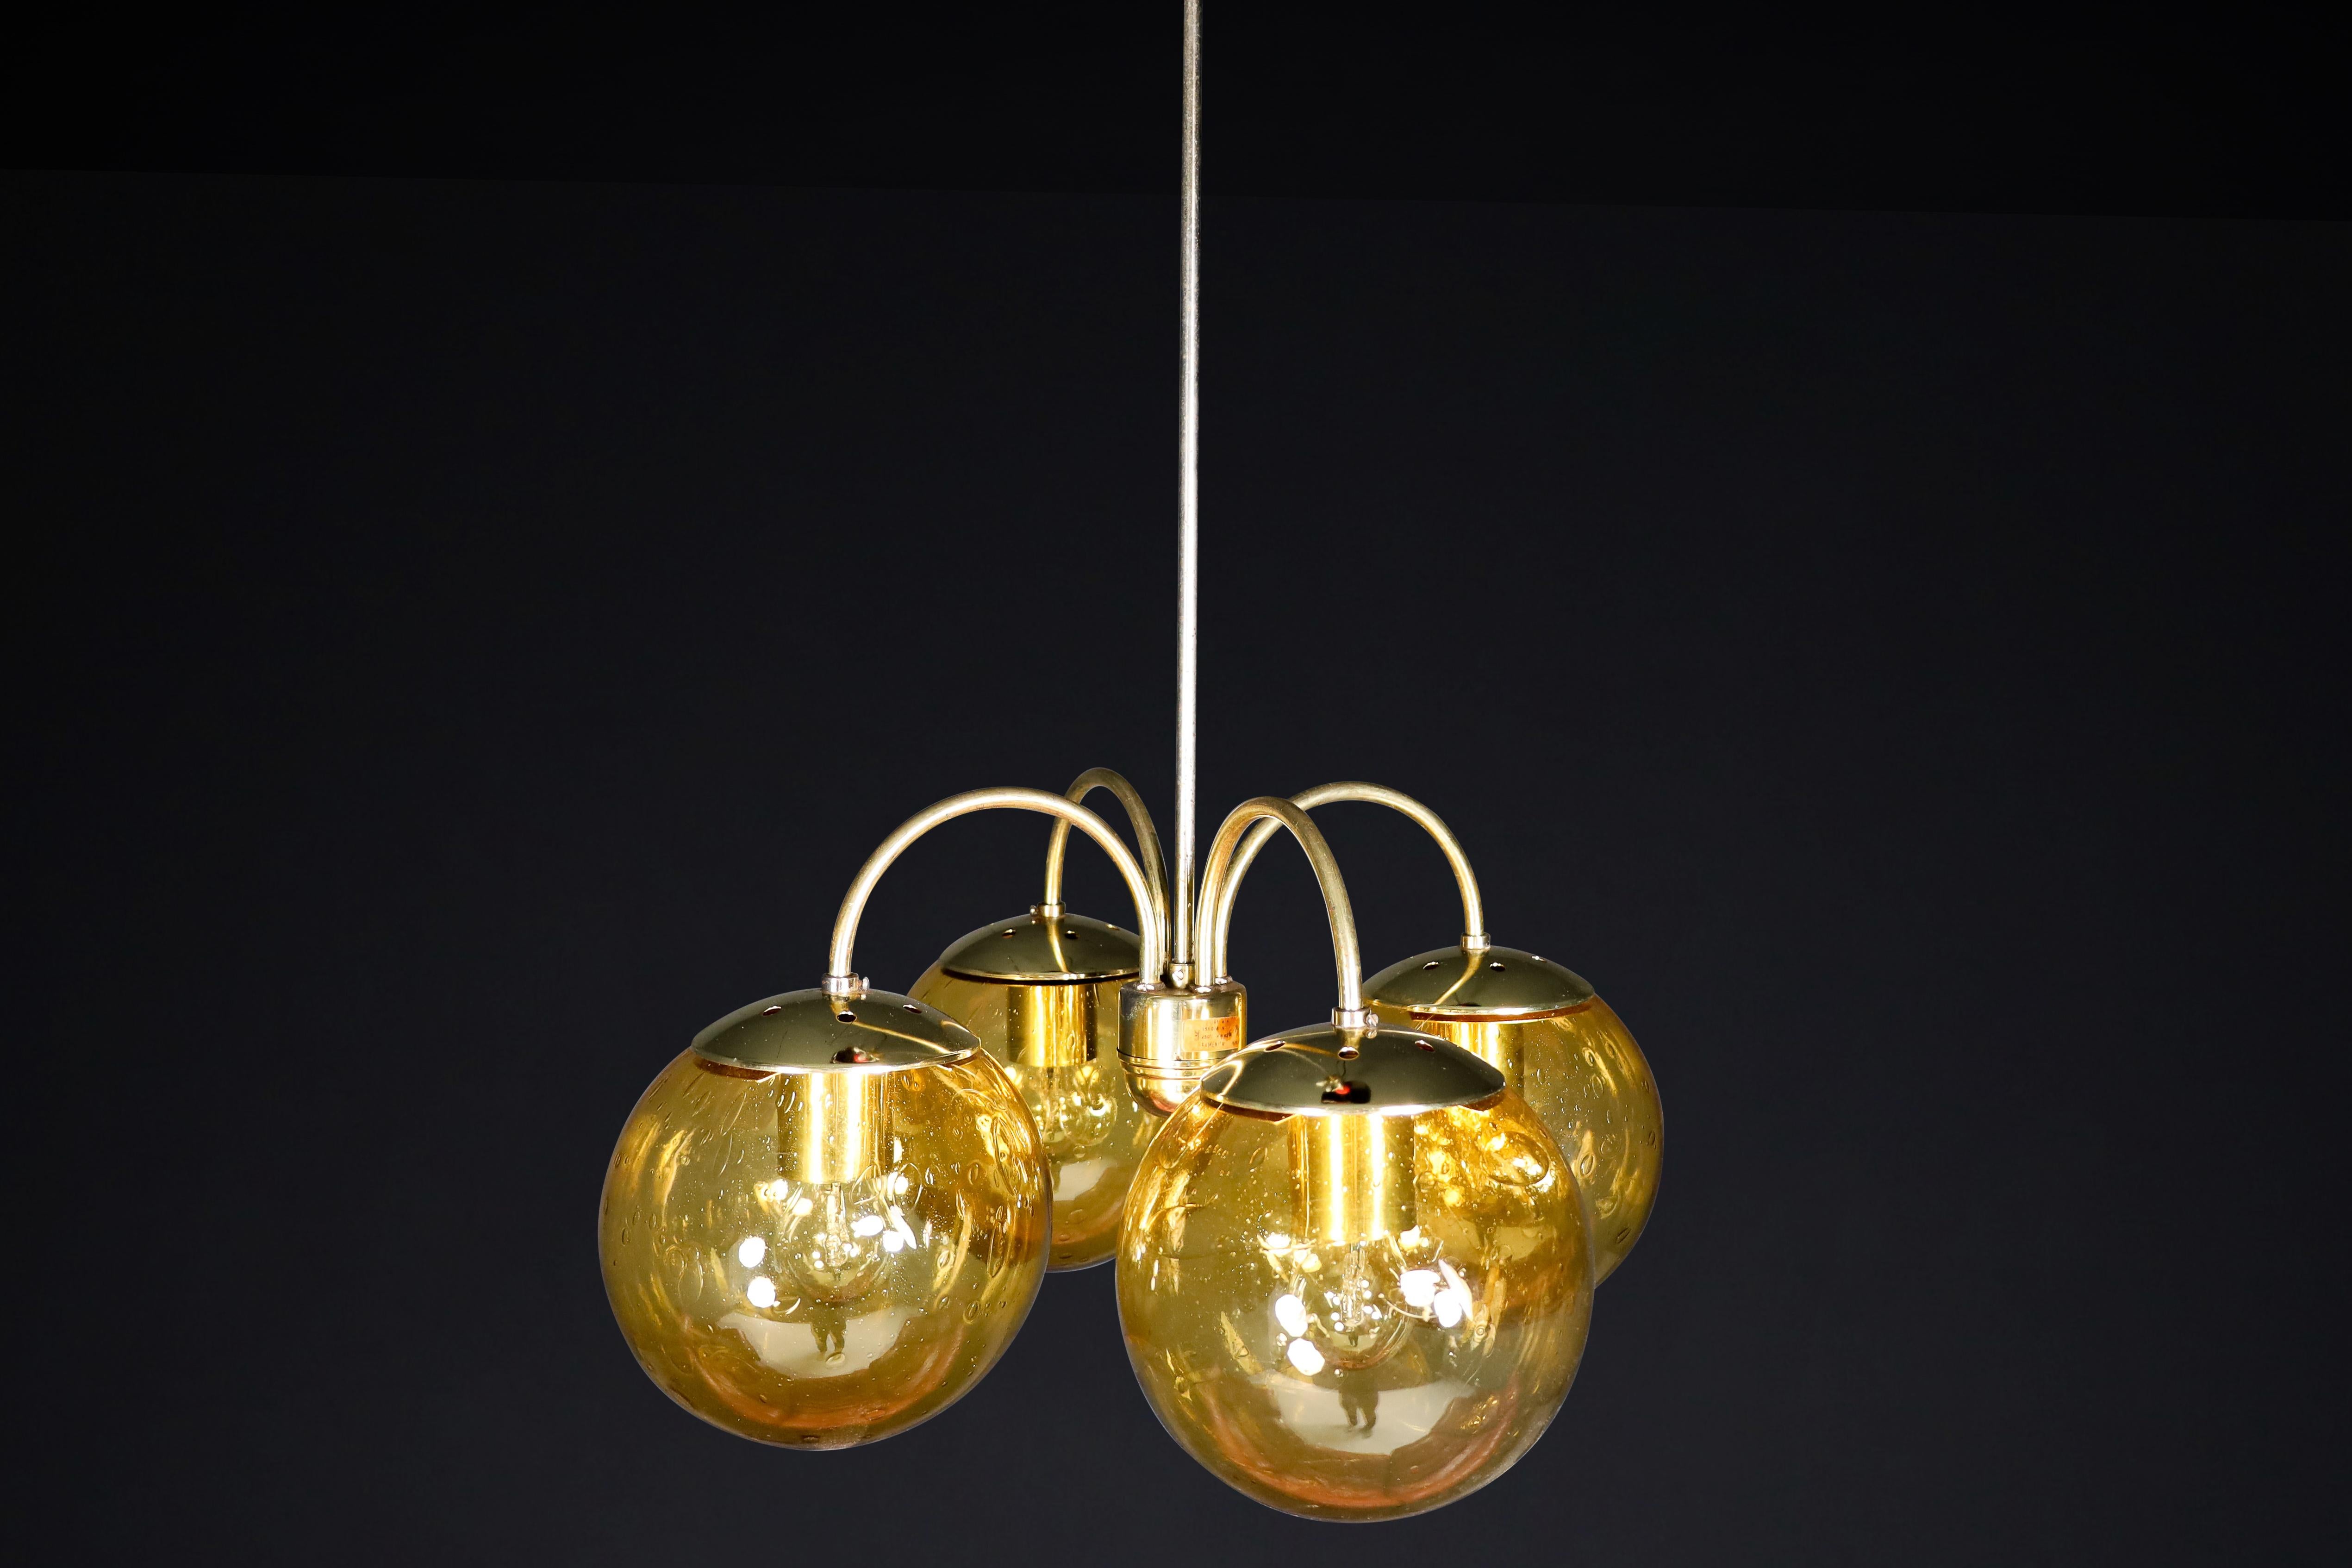 Midcentury Chandeliers in Brass and Amber-Colored Glass Czech Republic, 1960s For Sale 1